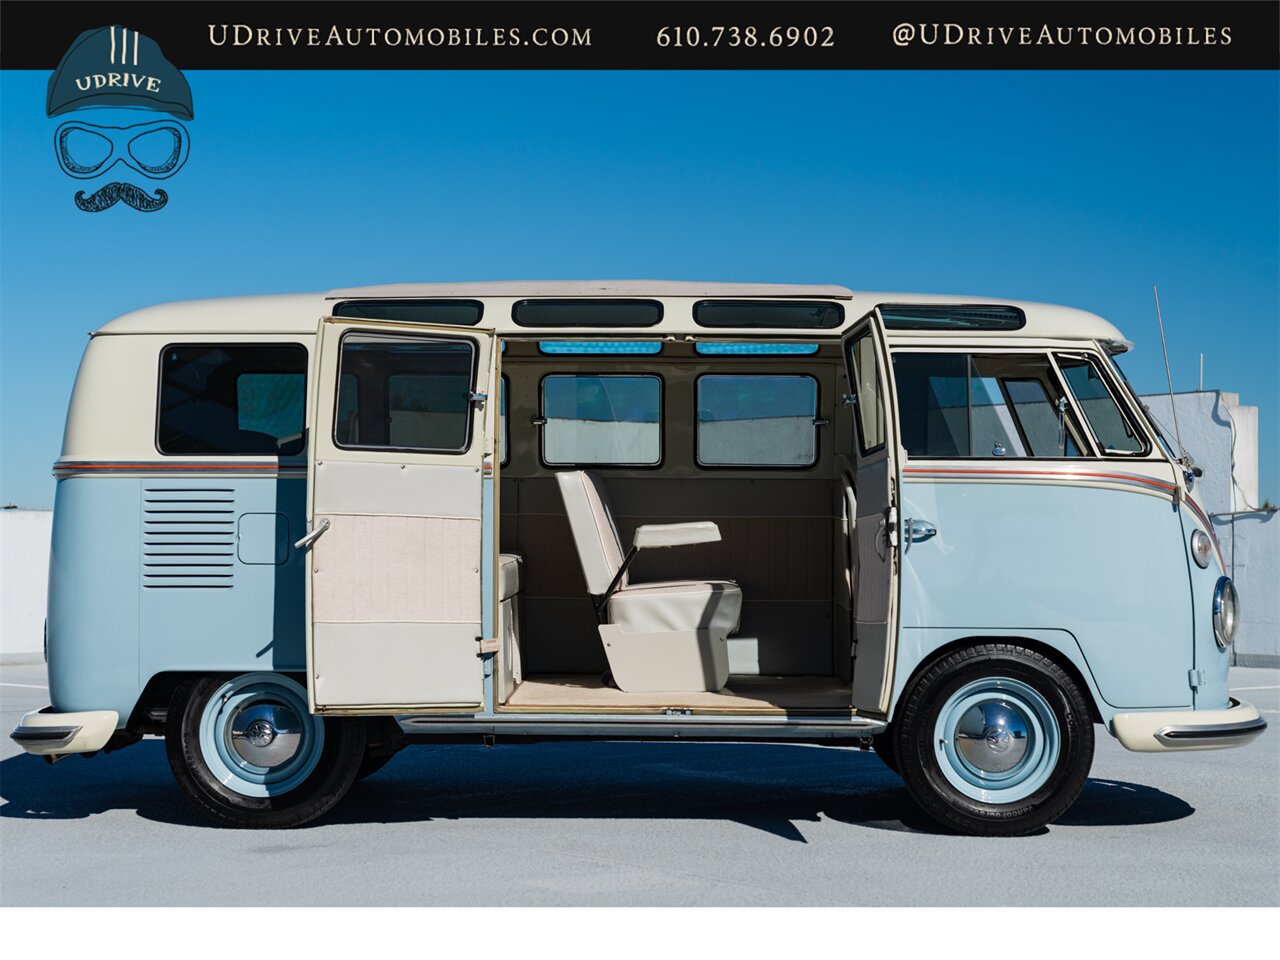 1965 Volkswagen Bus/Vanagon 21 Window Deluxe Transporter  Built By East Coast VW Restorations 1914cc A/C - Photo 19 - West Chester, PA 19382